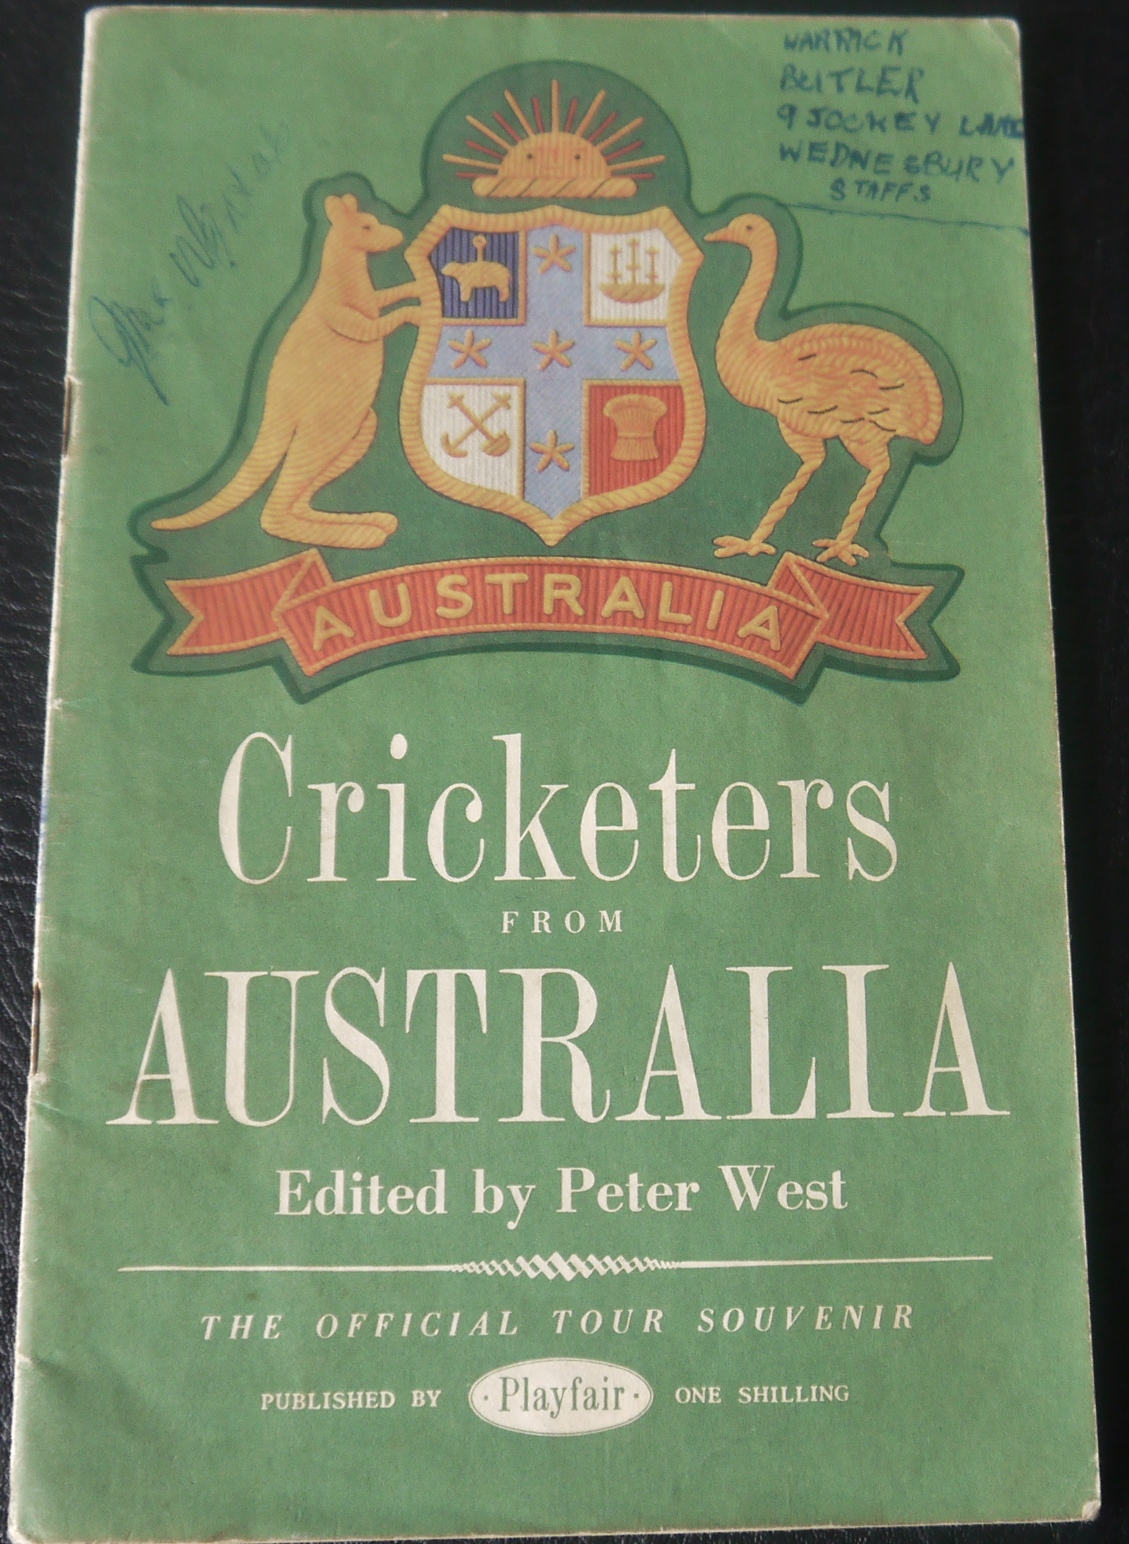 CRICKET AUSTRALIA 1953 TOUR BROCHURE SIGNED BY 5 PLAYERS